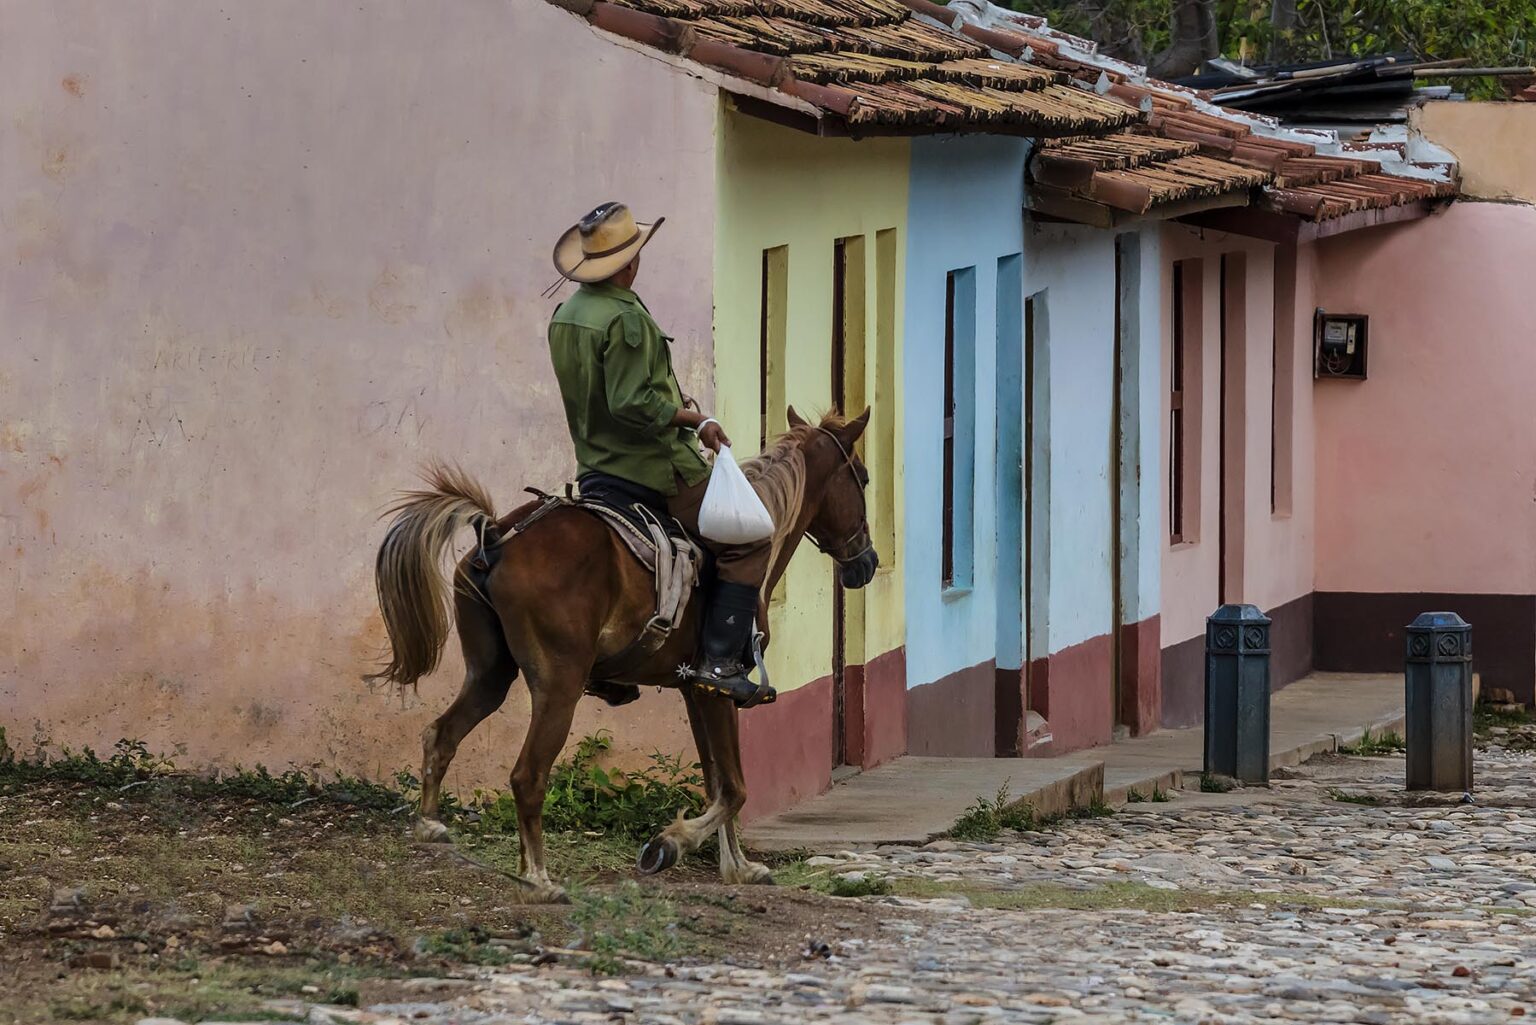 Horses and cowboys are a common site on the cobblestone streets of TRINIDAD, CUBA